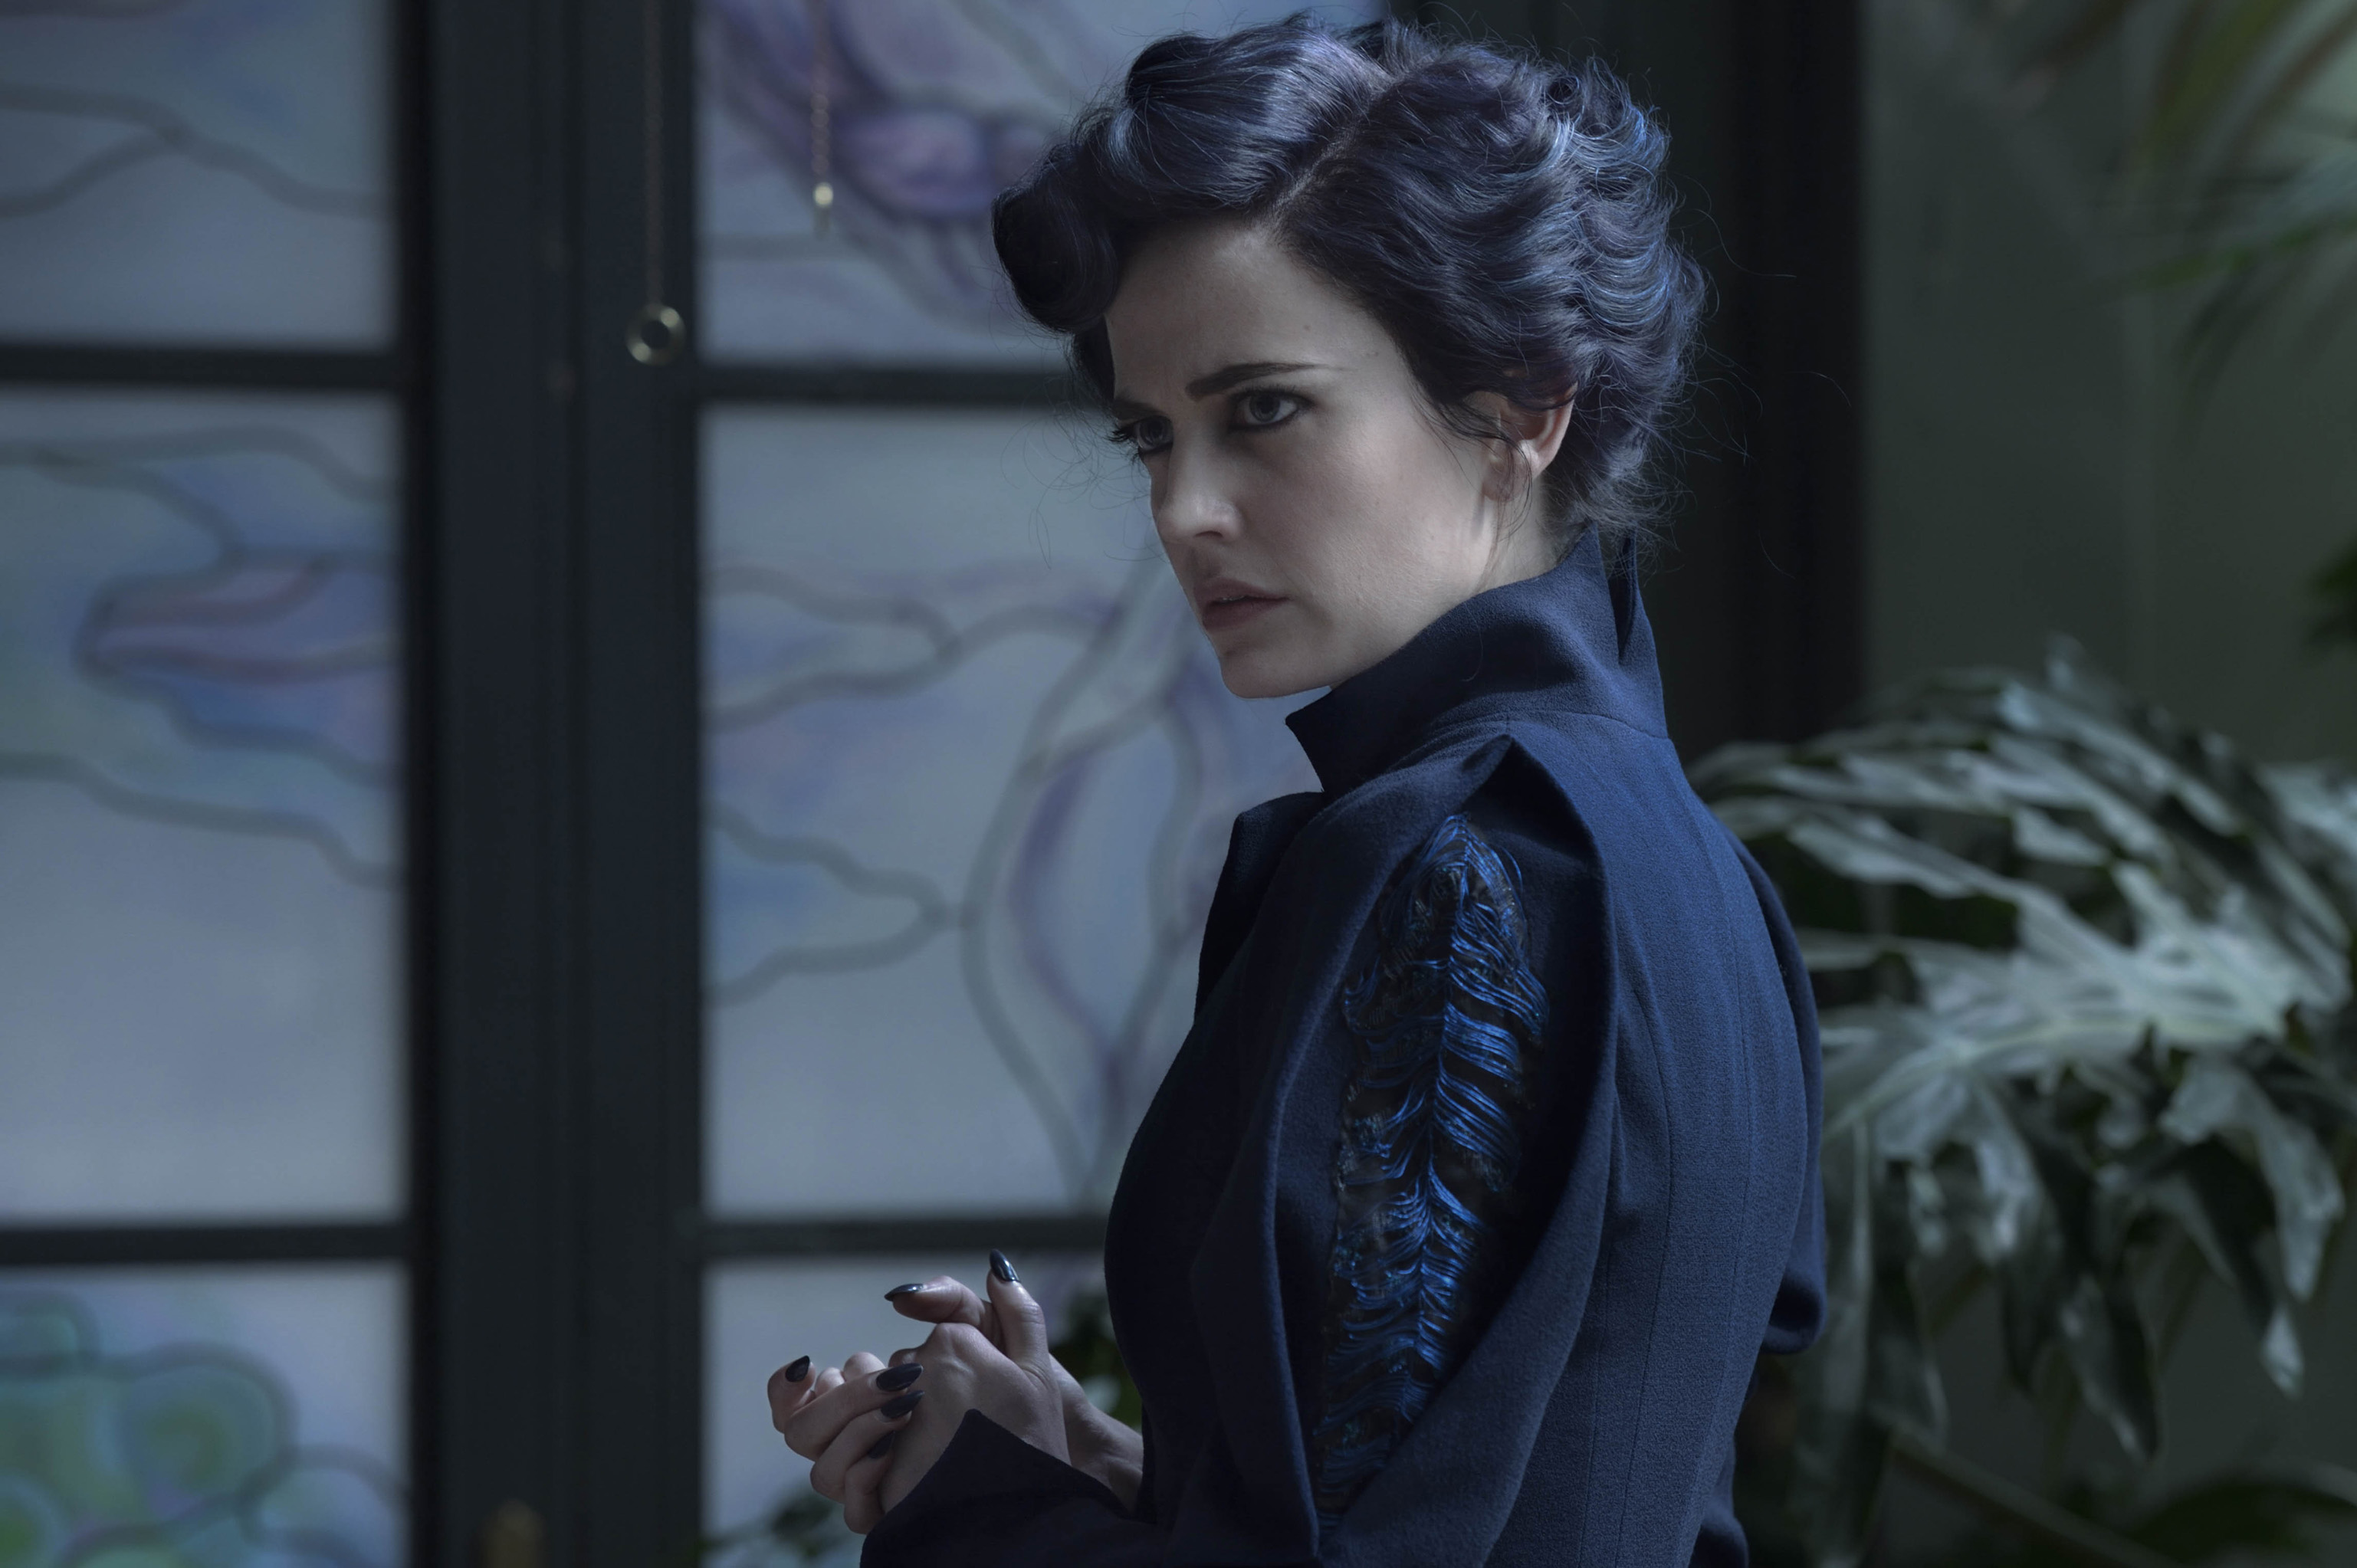 DF-04244 - Eva Green portrays Miss Peregrine, who oversees a magical place that is threatened by powerful enemies. Photo Credit: Jay Maidment.